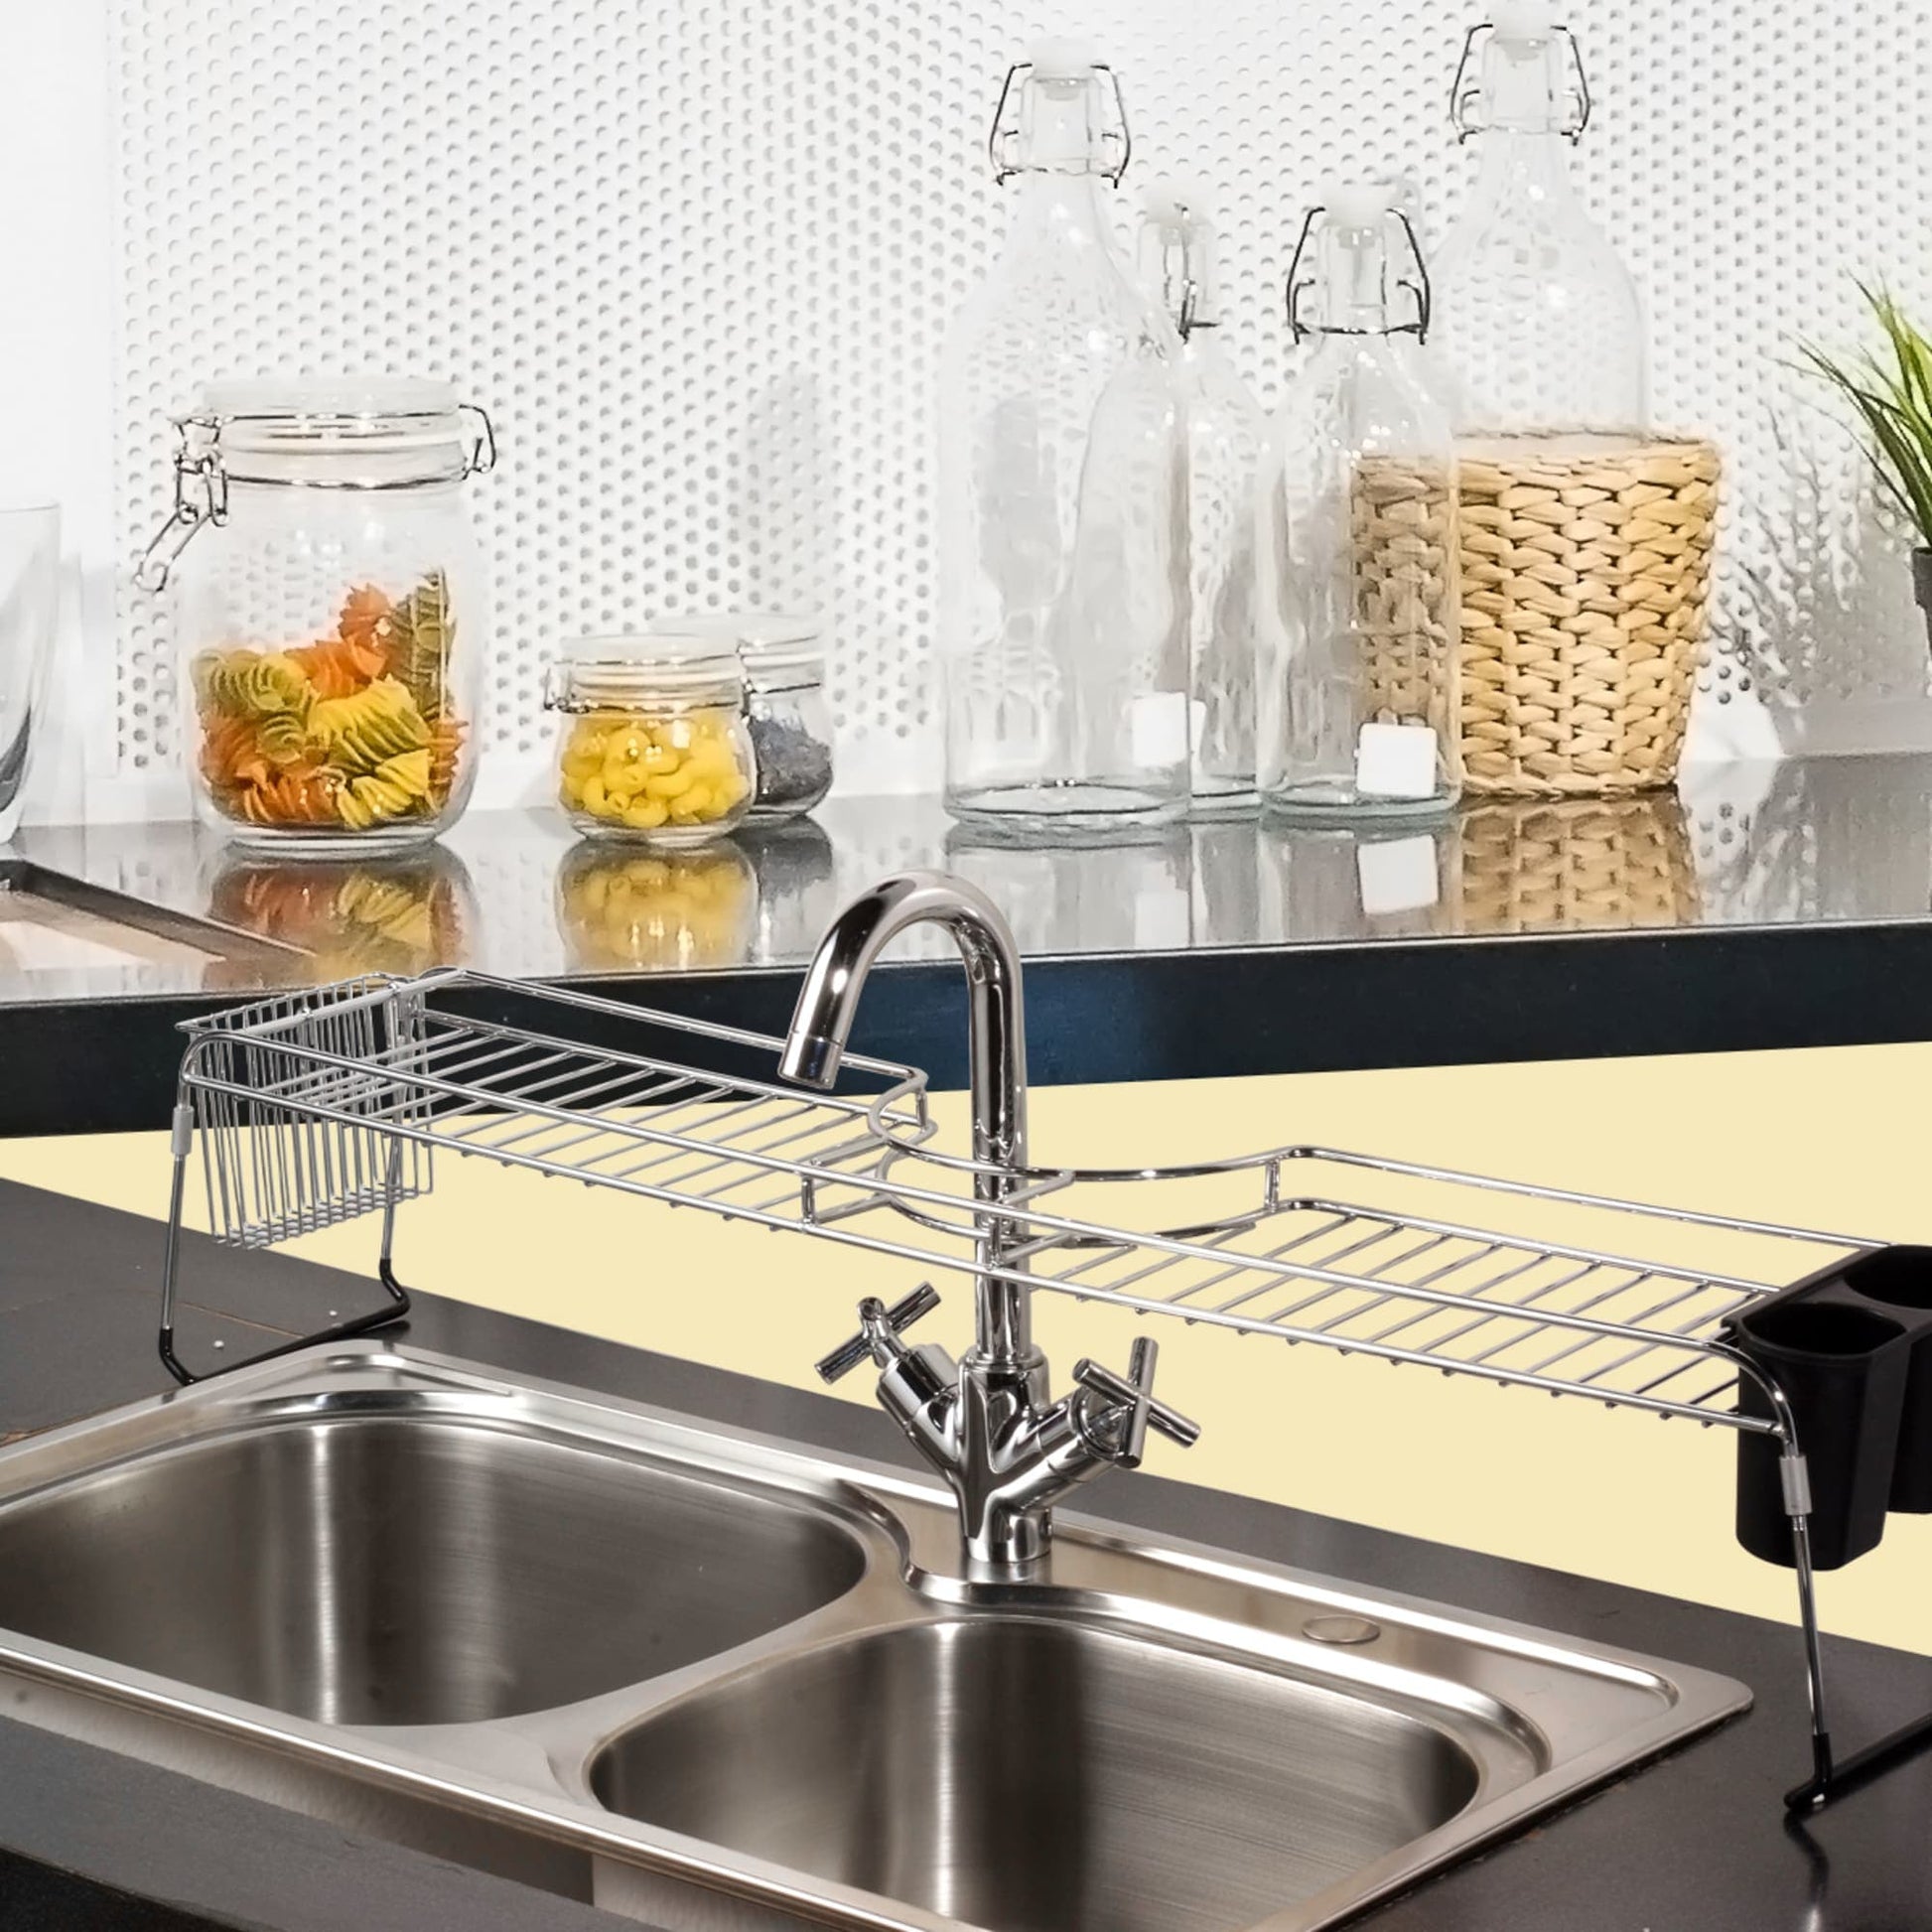 Chrome Plated Steel Faucet Spacer Over the Sink Shelf with Cutlery Holder, KITCHEN ORGANIZATION